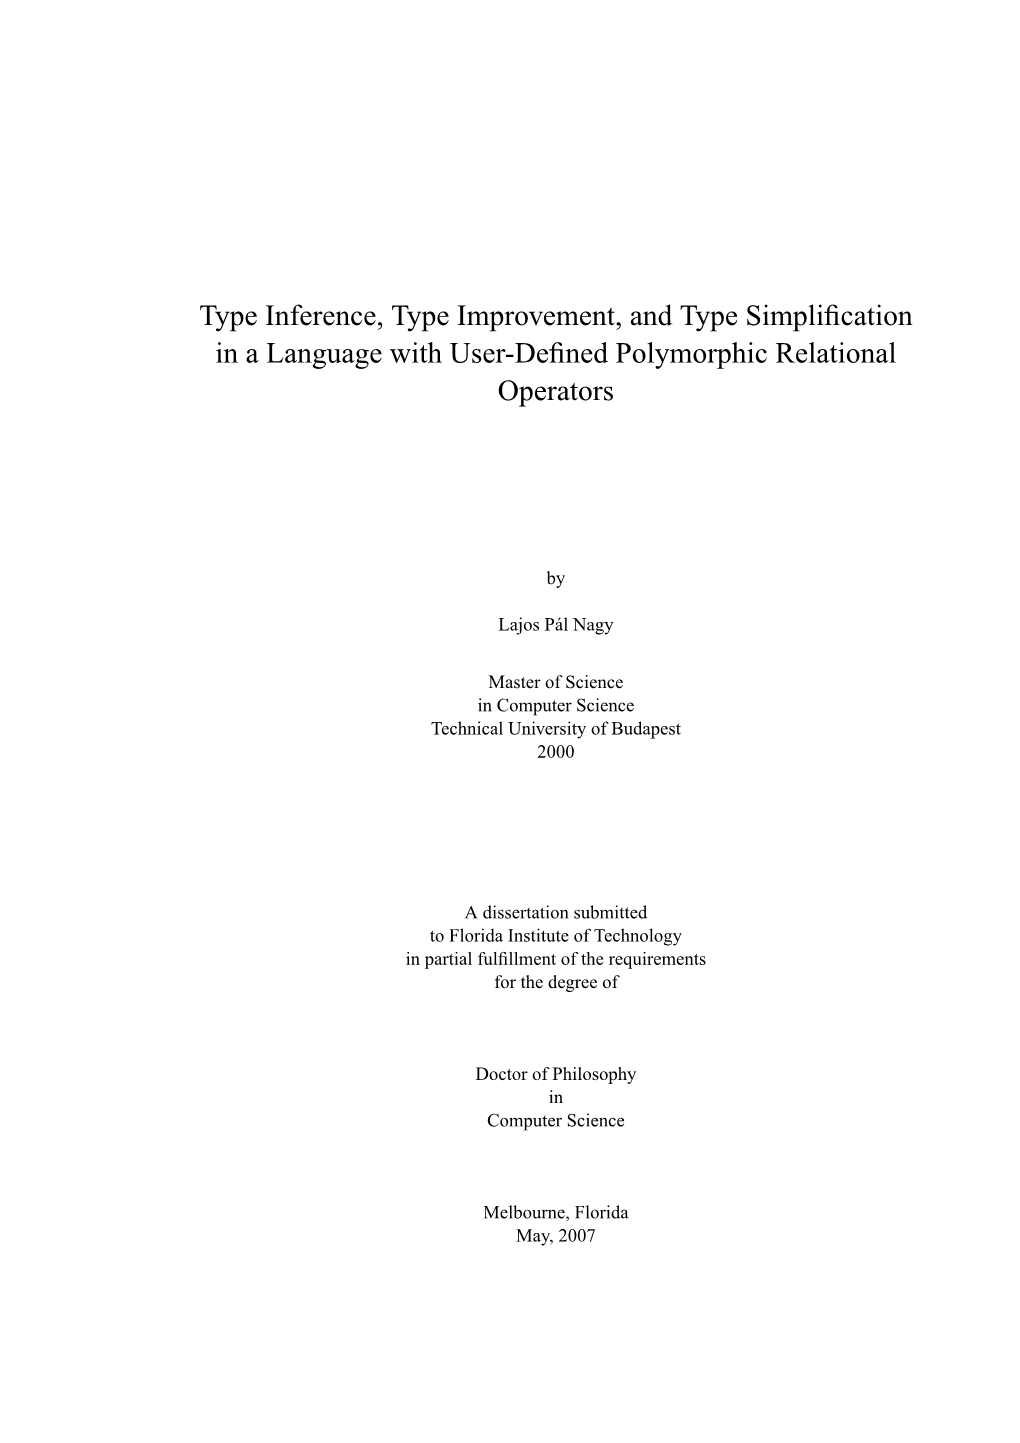 Type Inference, Type Improvement, and Type Simplification in a Language with User-Defined Polymorphic Relational Operators